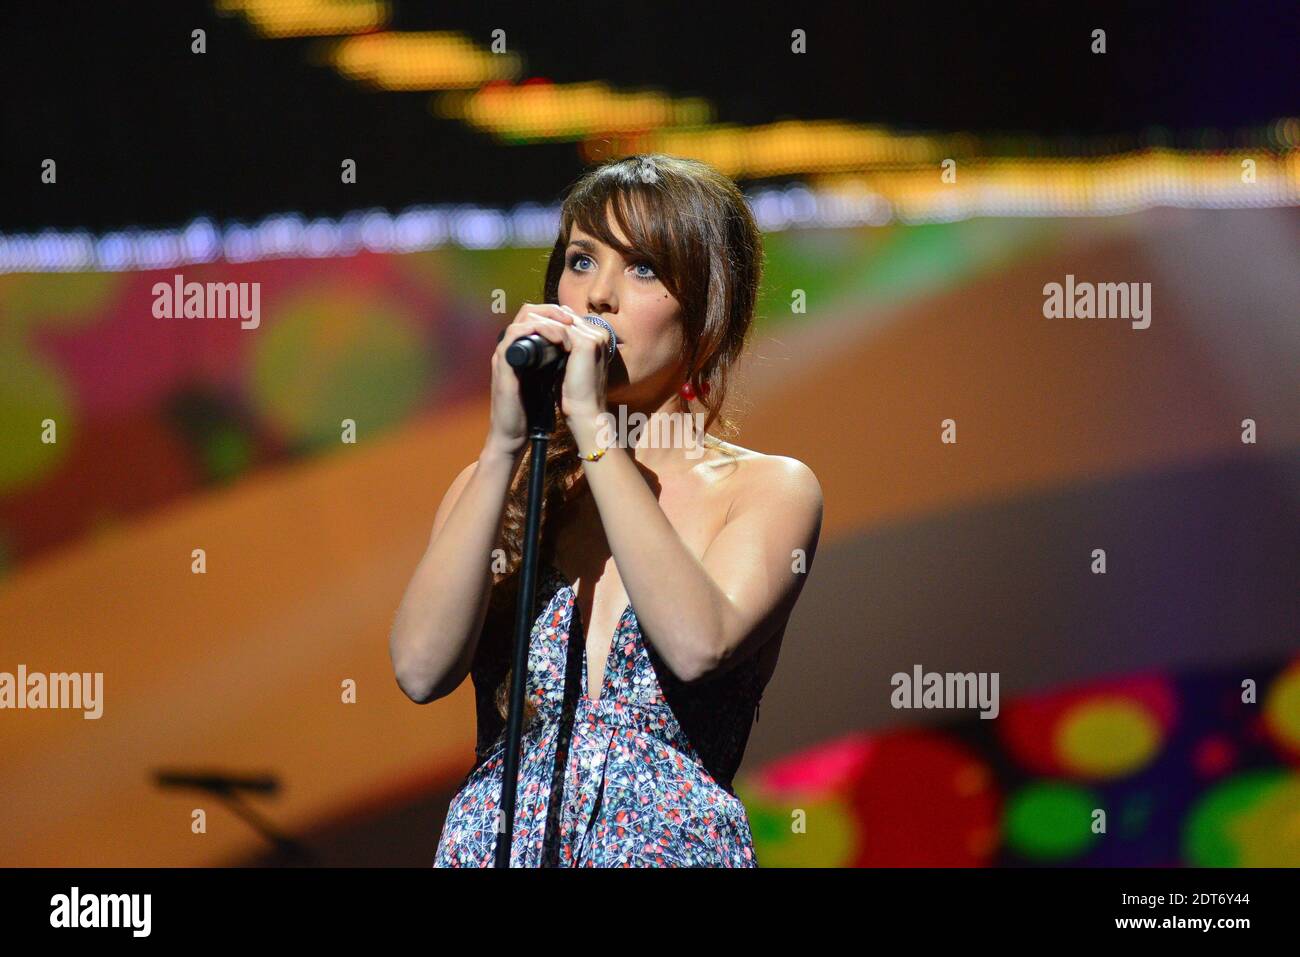 Zaz during the 29th Victoires de la Musique ceremony held at the Zenith Hall in Paris, France on February 14, 2014. Photo by NIcolas Briquet/ABACAPRESS.COM Stock Photo